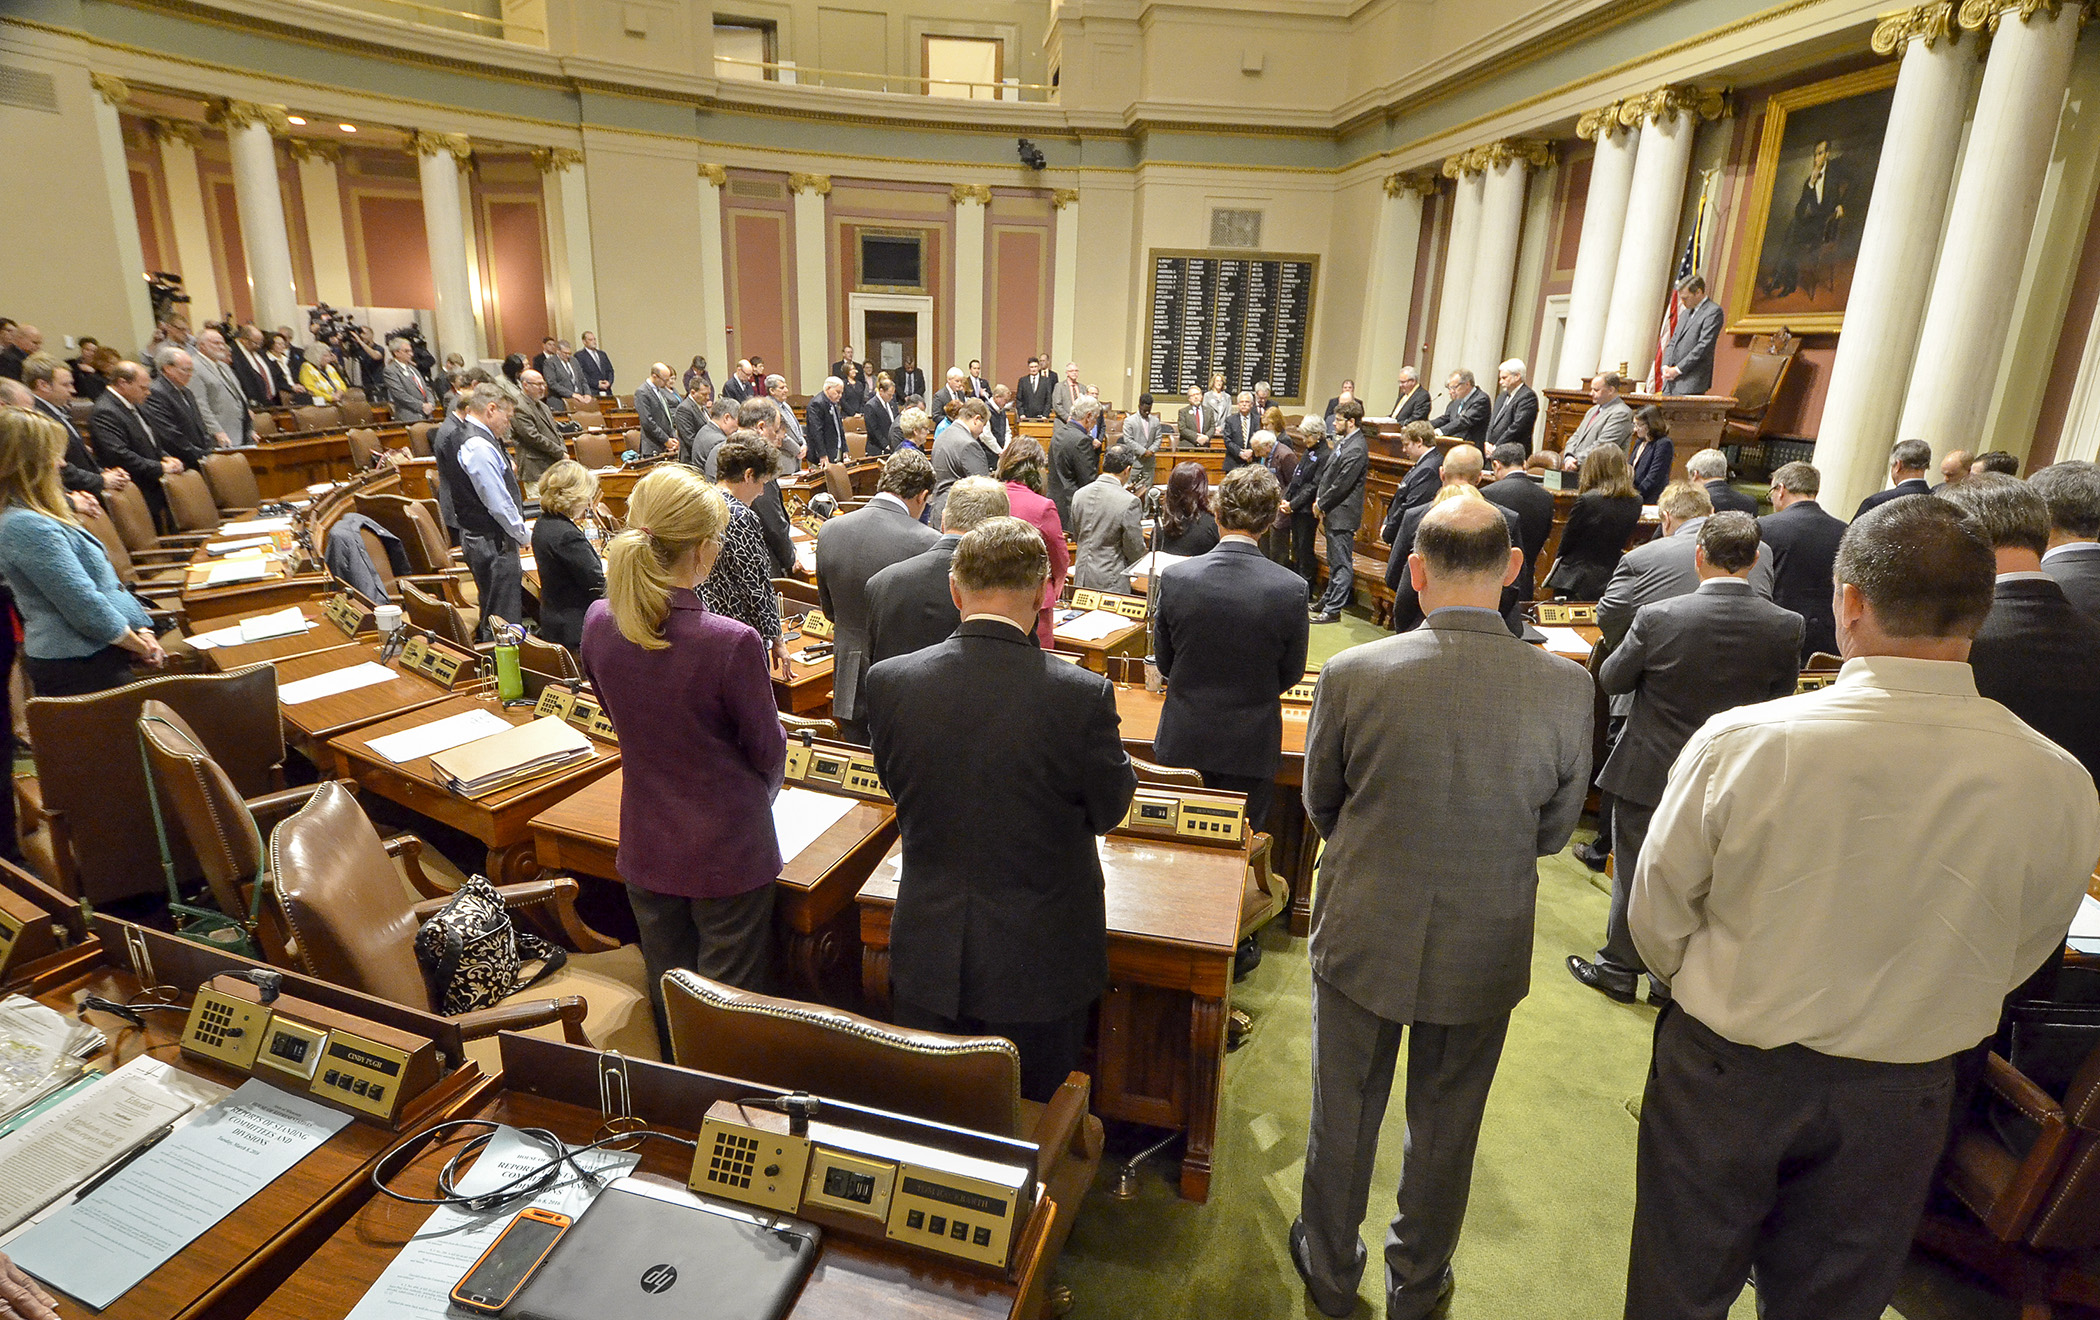 Members of the House of Representatives stand for the invocation on the opening day of the 2016 legislative session. Photo by Andrew VonBank